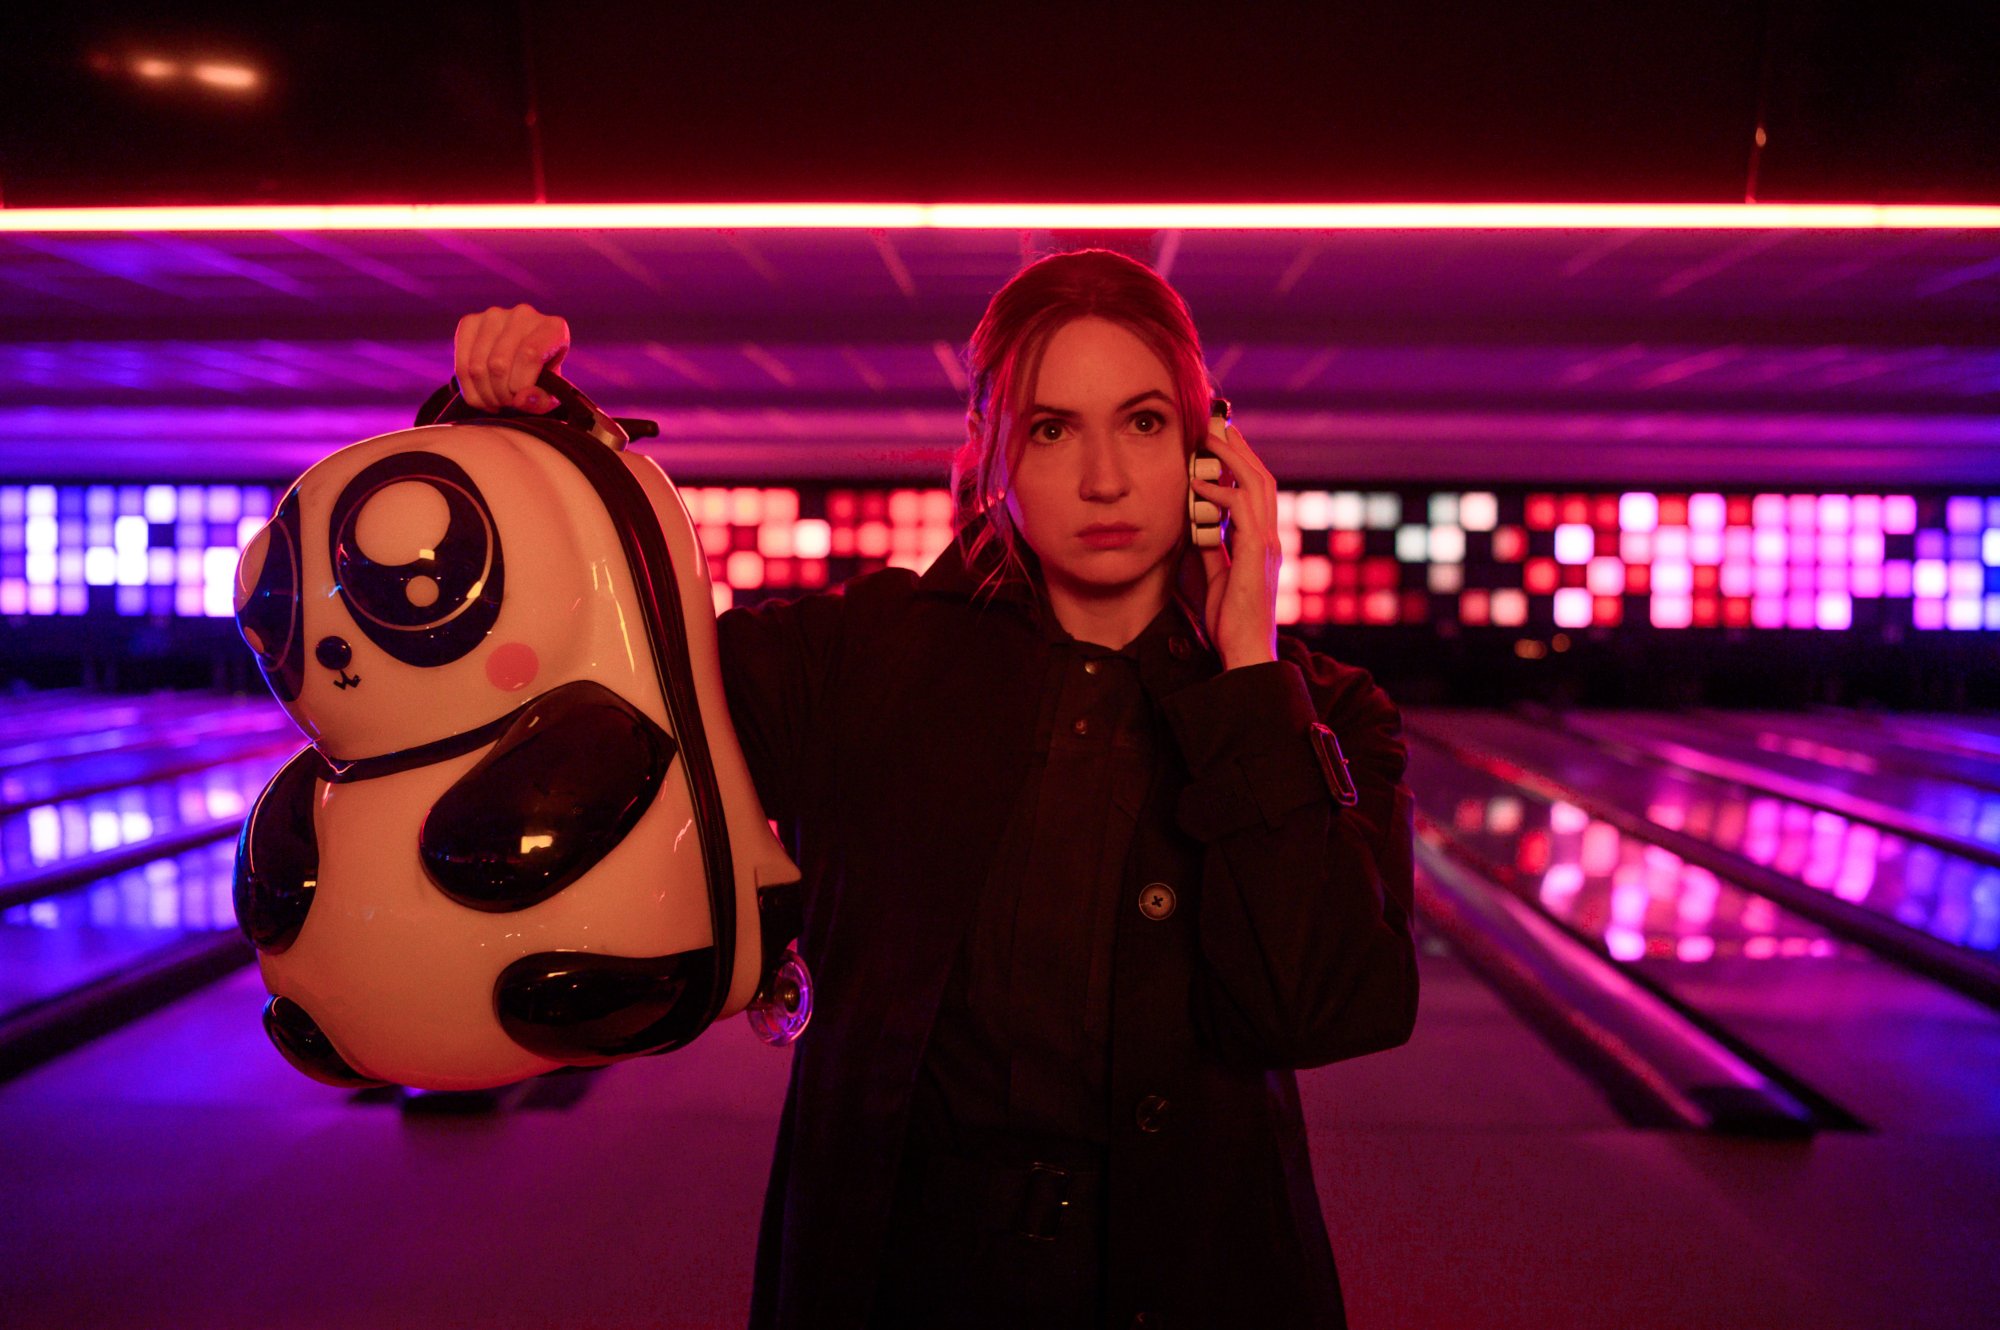 Karen Gillan as Sam in Gunpowder Milkshake. She's holding up a backpack and standing in a bowling alley.